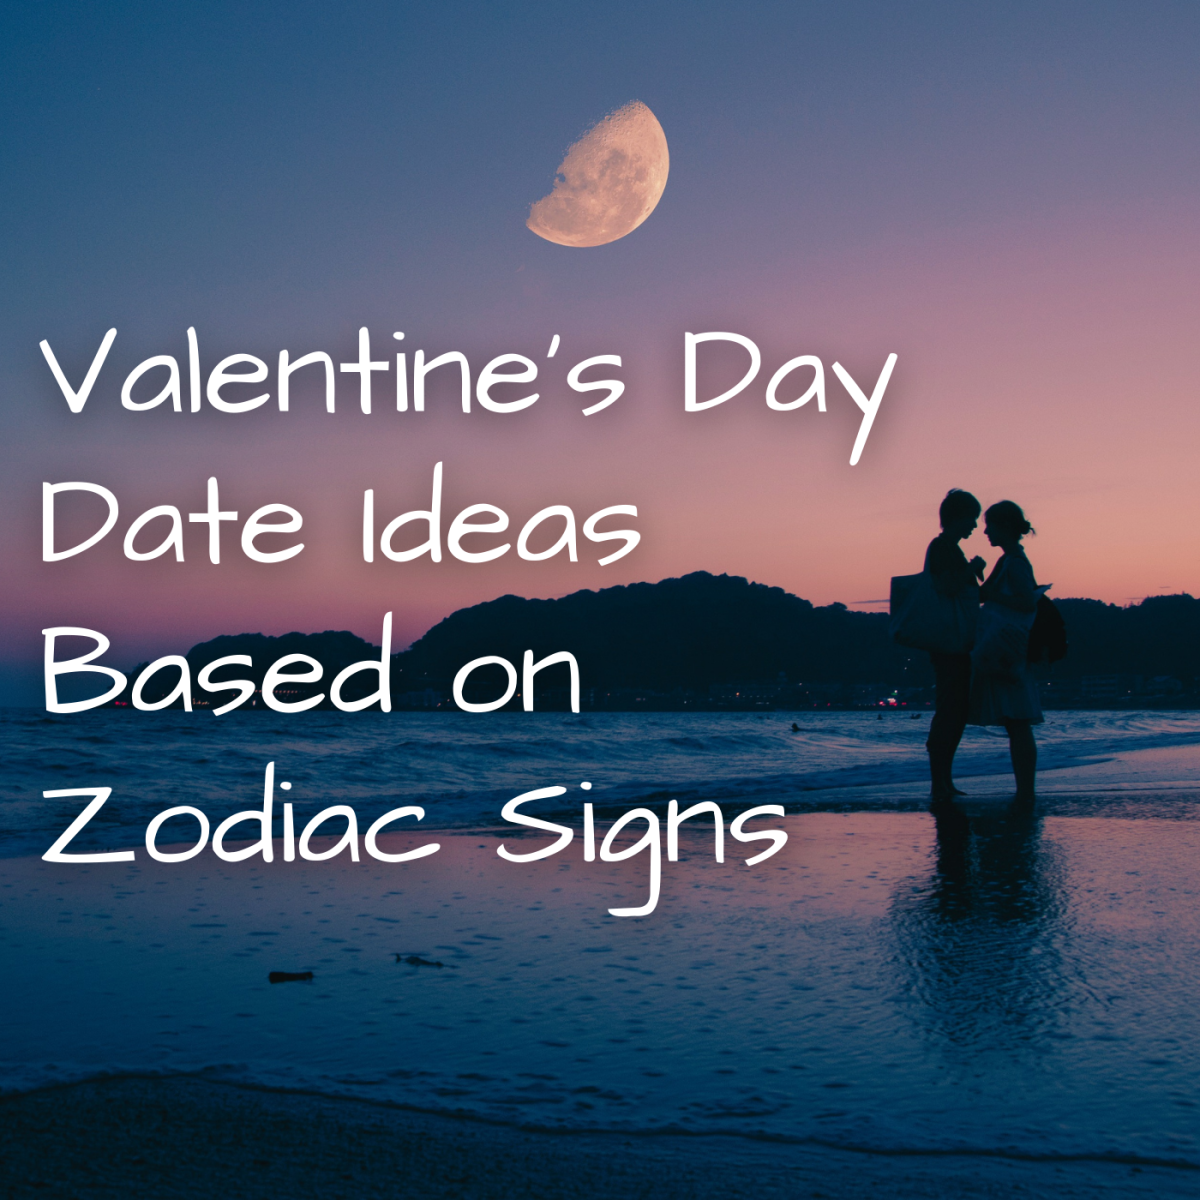 Valentine's dates can be made easy if you consider your partner's zodiac sign. Each sign has different needs, and each is wowed by different things.